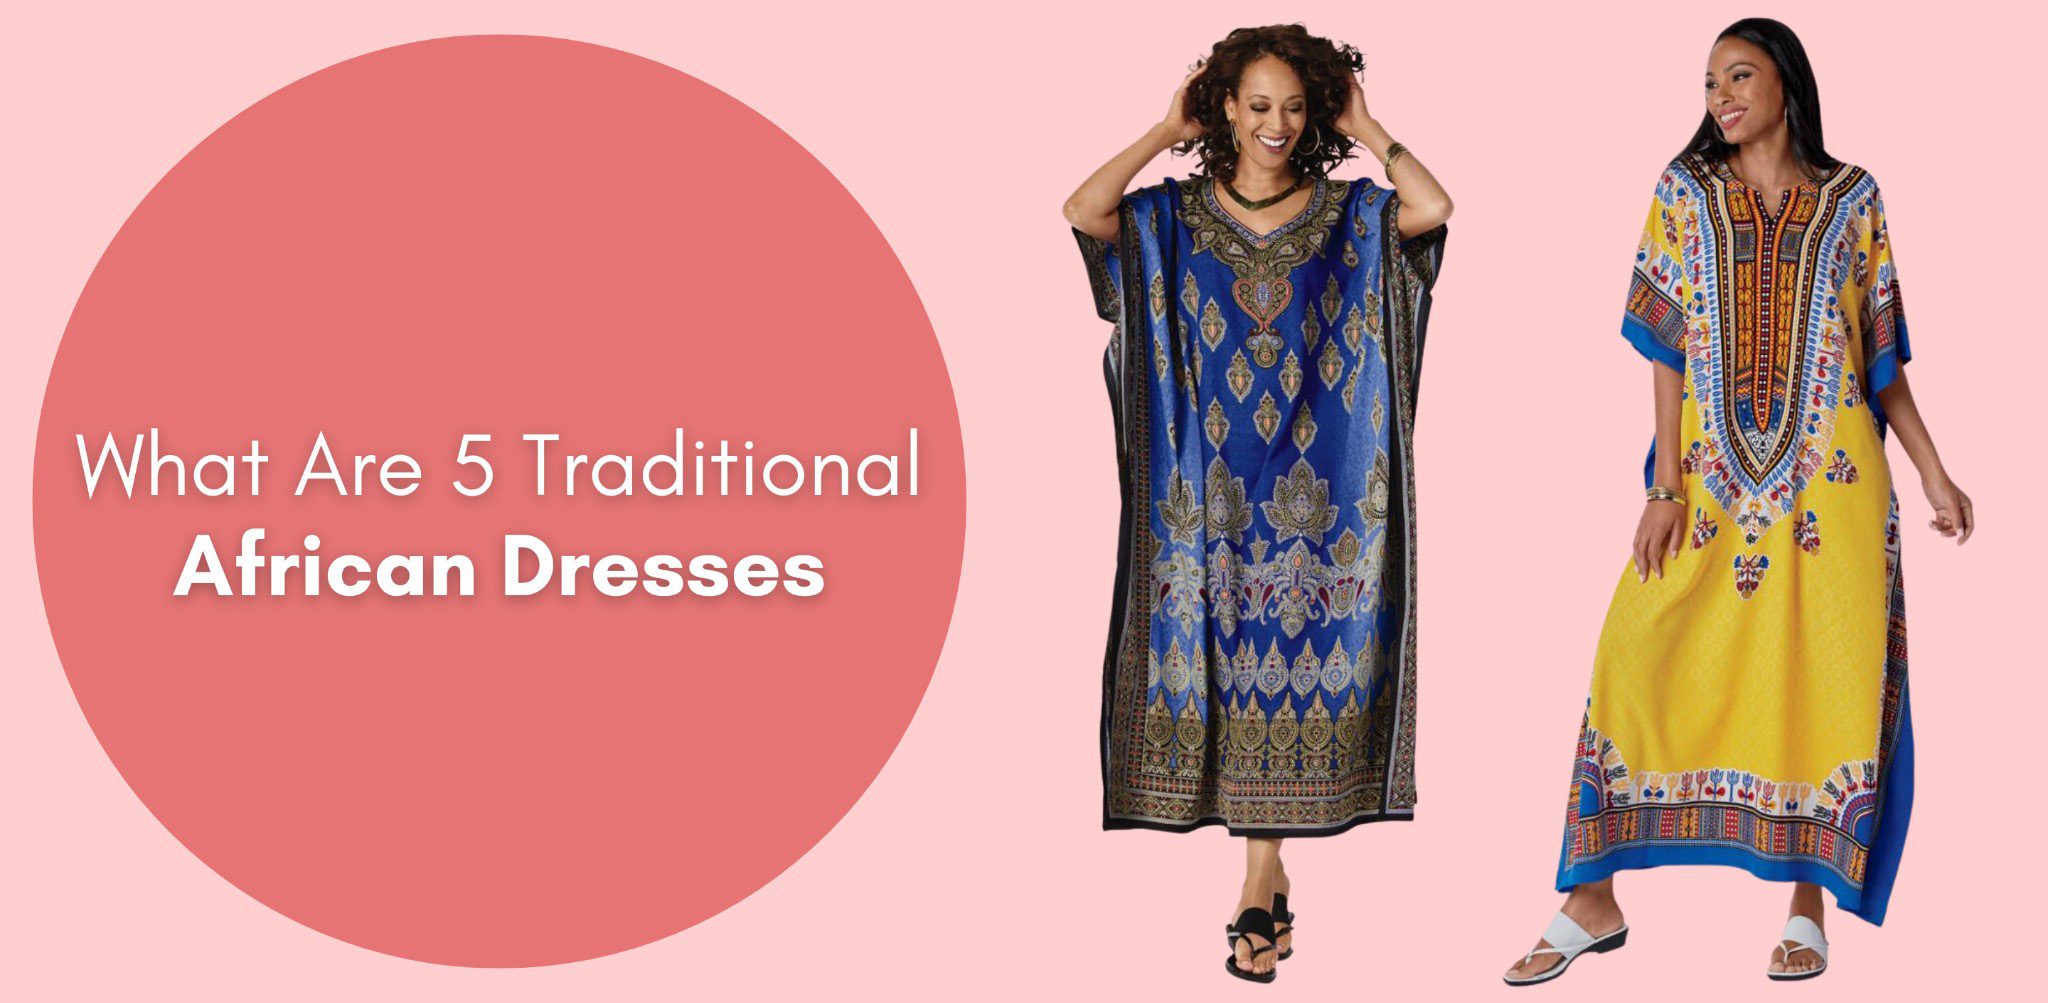 What Are 5 Traditional African Dresses?